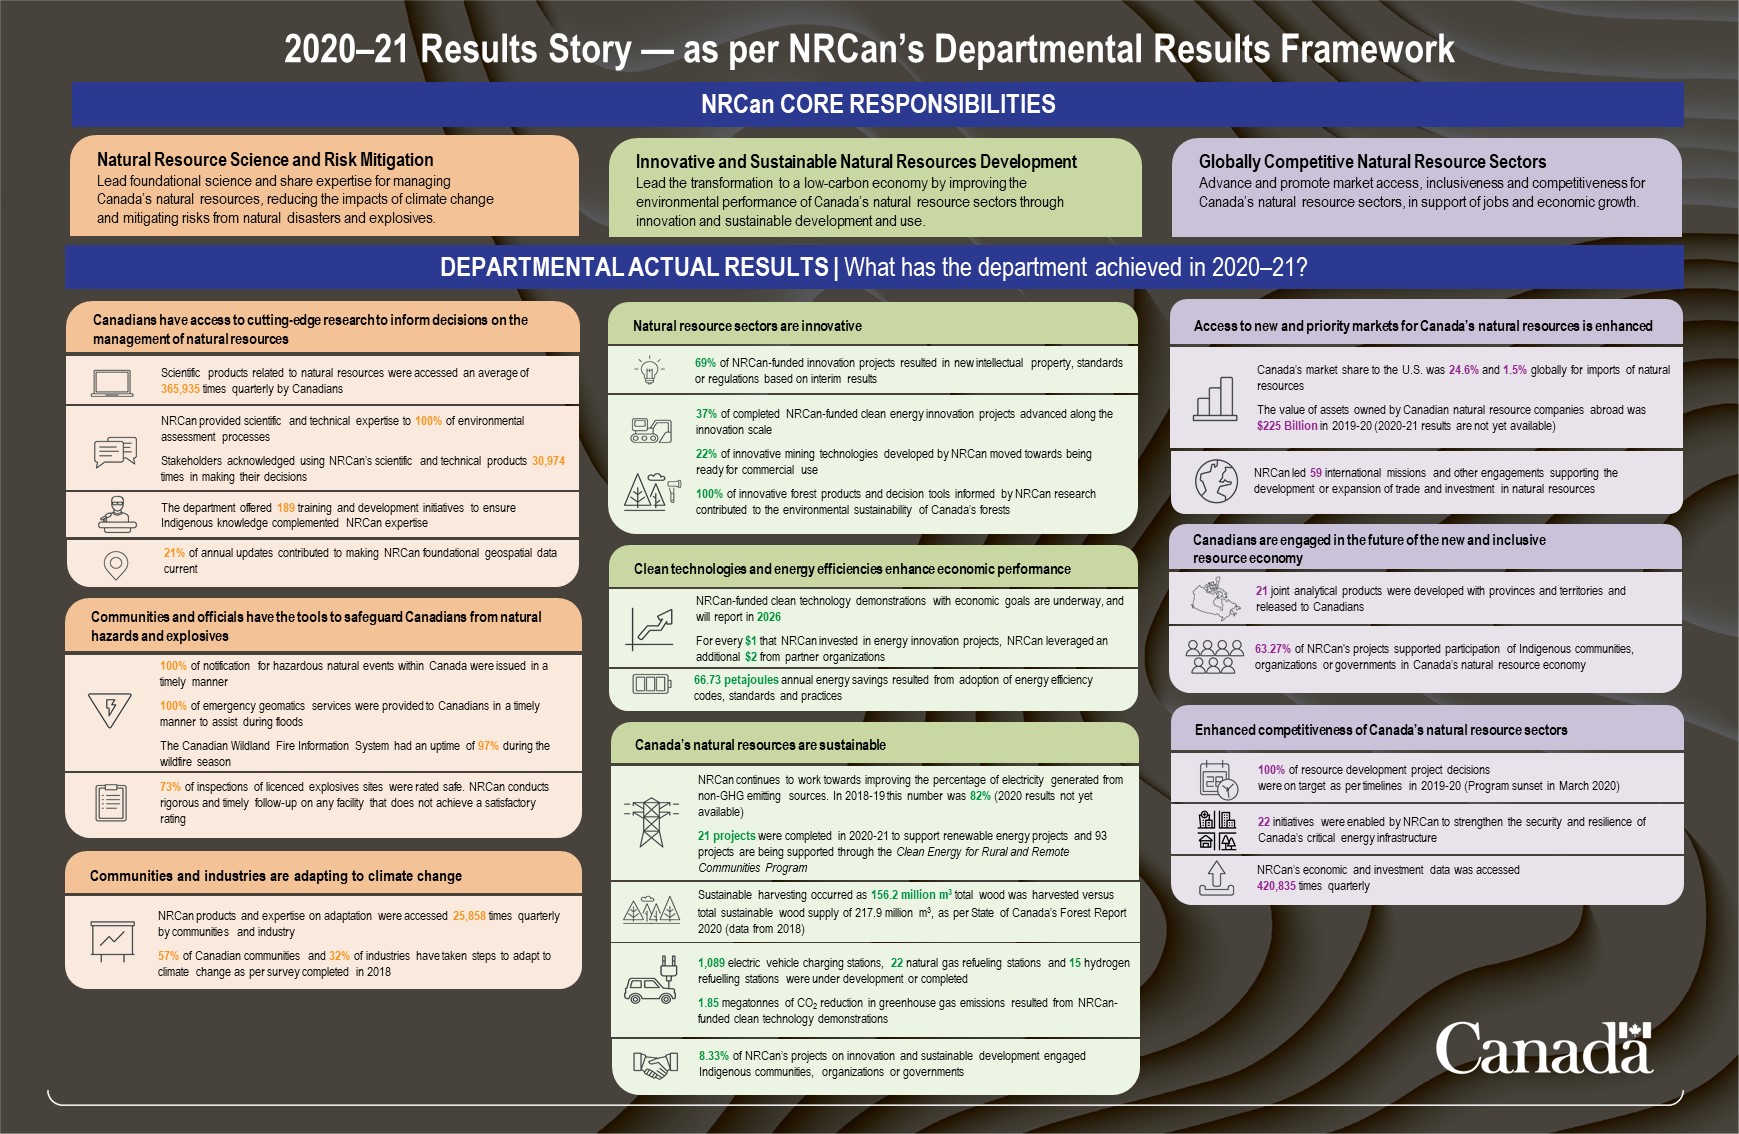 2020-21 Results Story - as per NRCan's Departmental Results Network